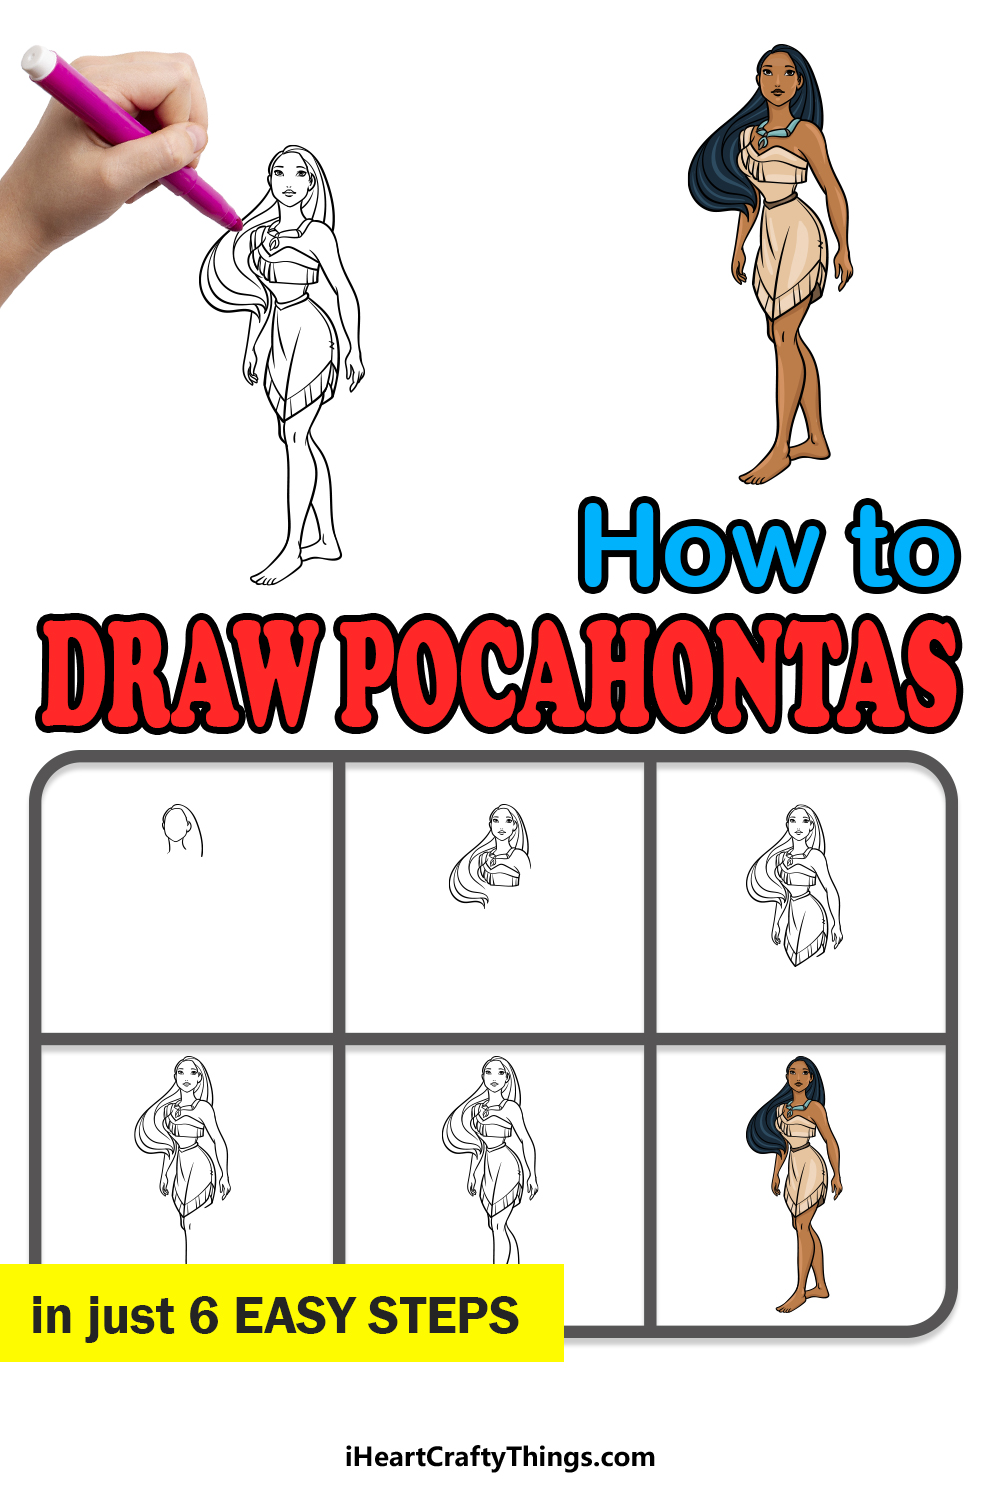 how to draw Pocahontas in 6 easy steps